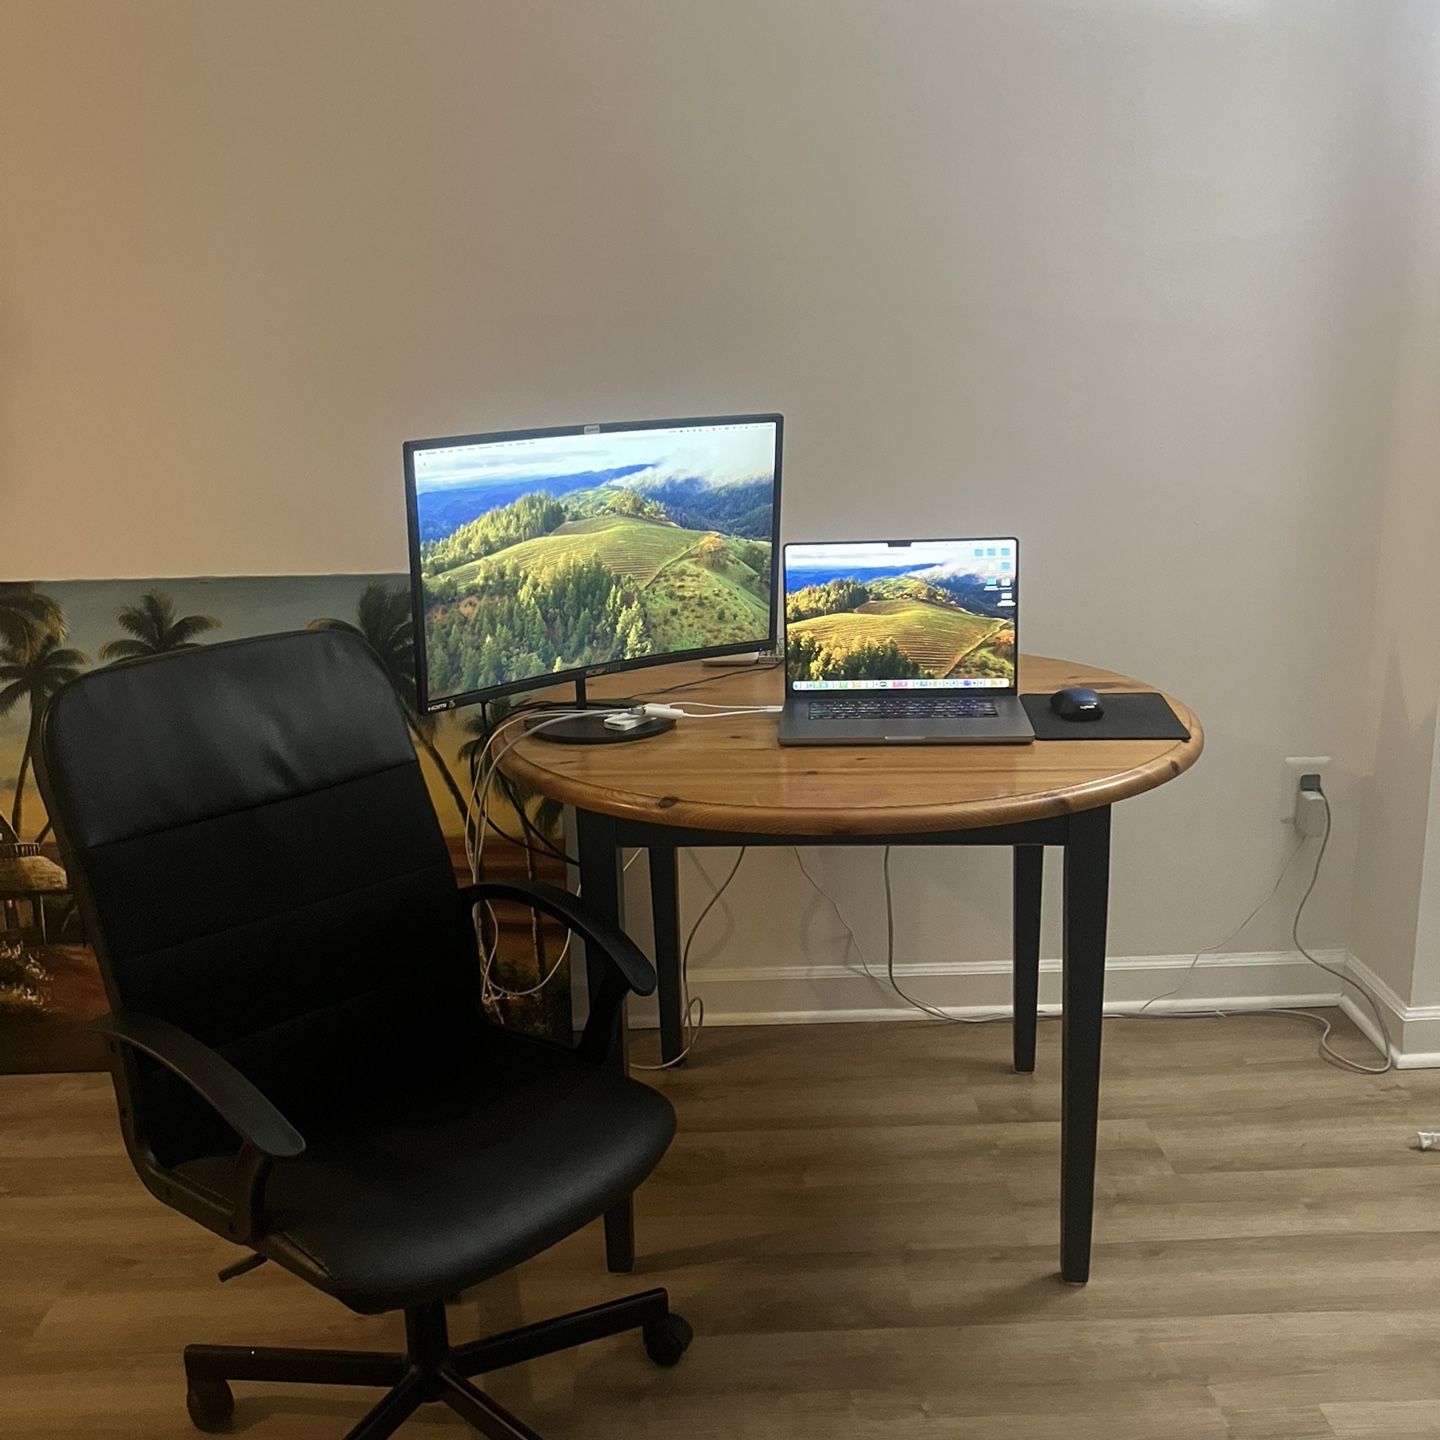 FREE DINING TABLE AND DESK CHAIR